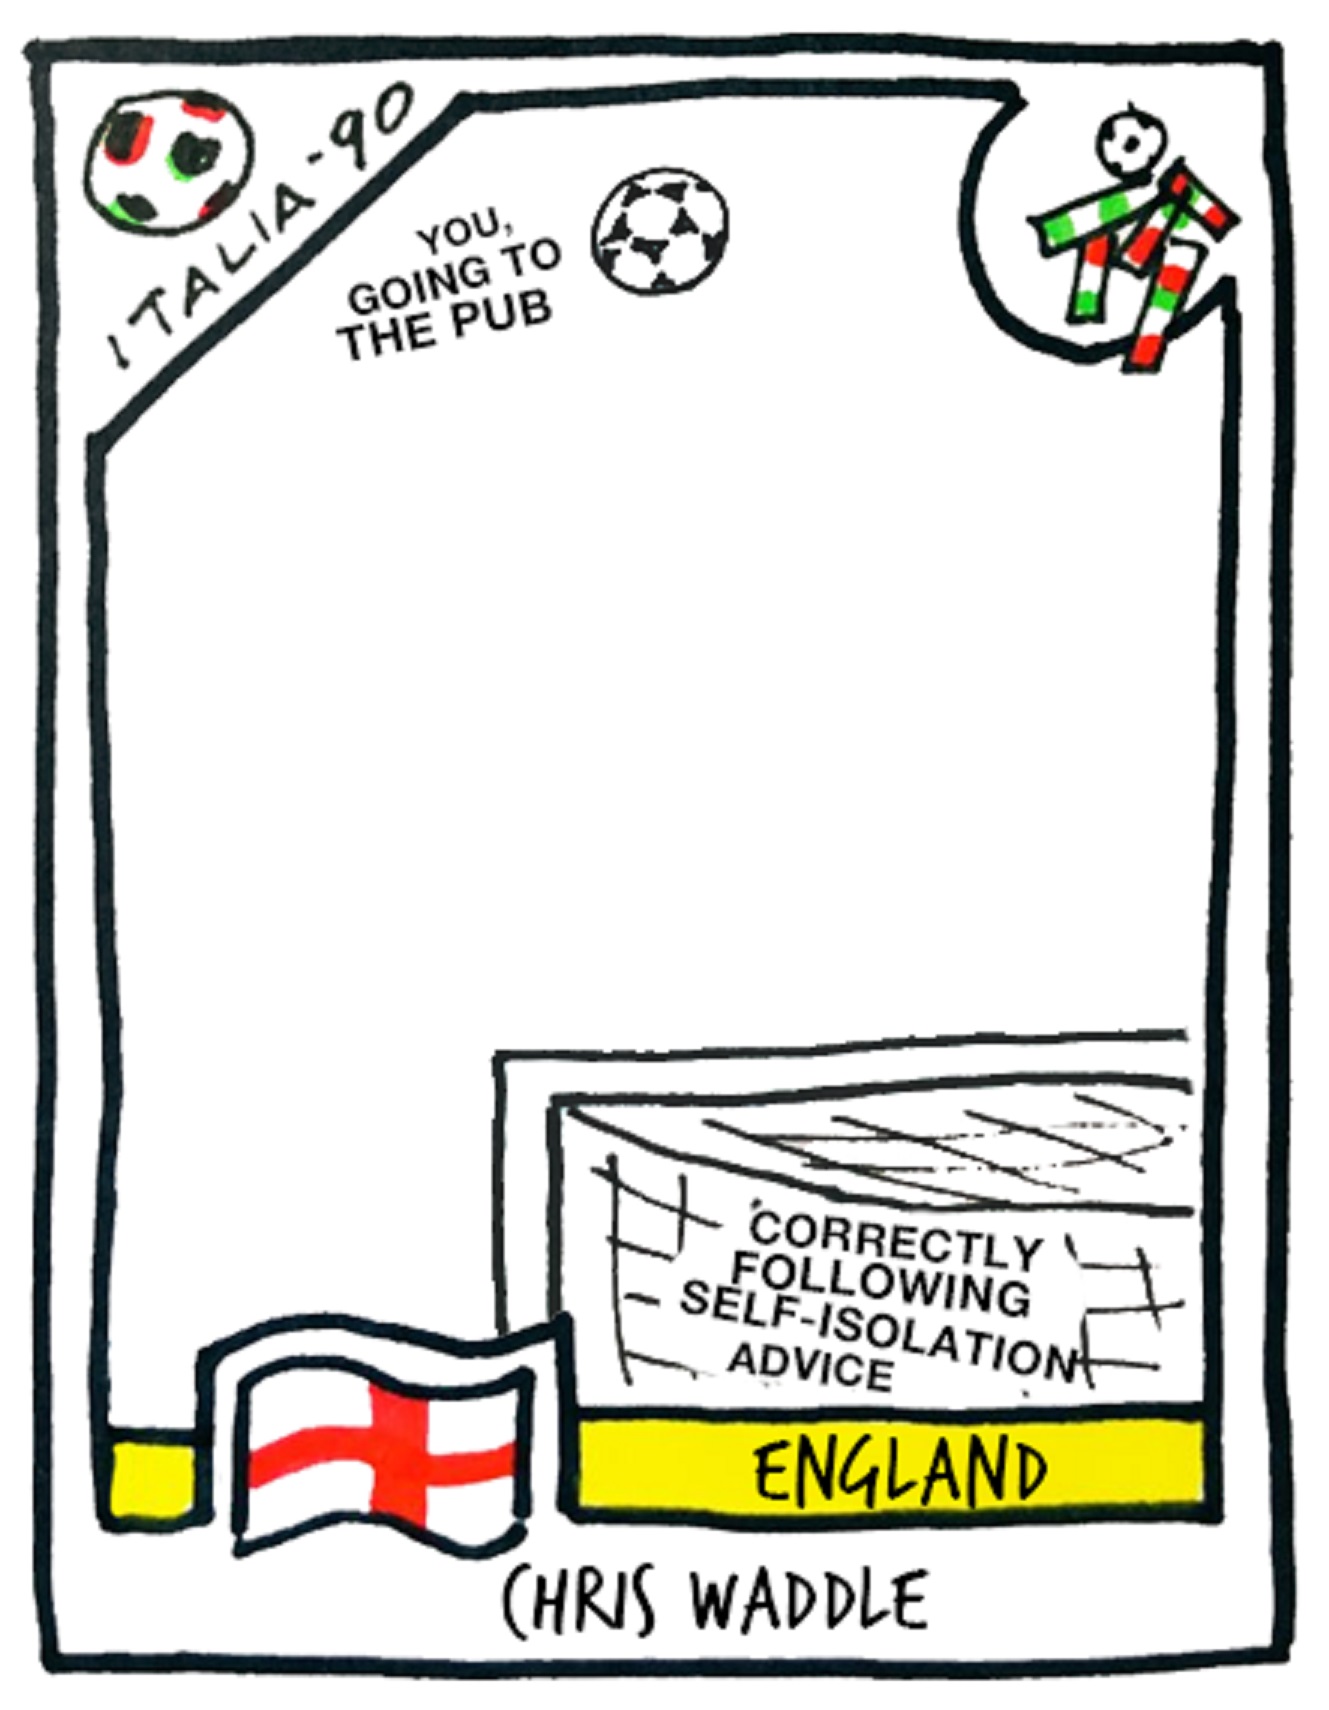 A meme about the Italia 90 World Cup and the coronavirus pandemic